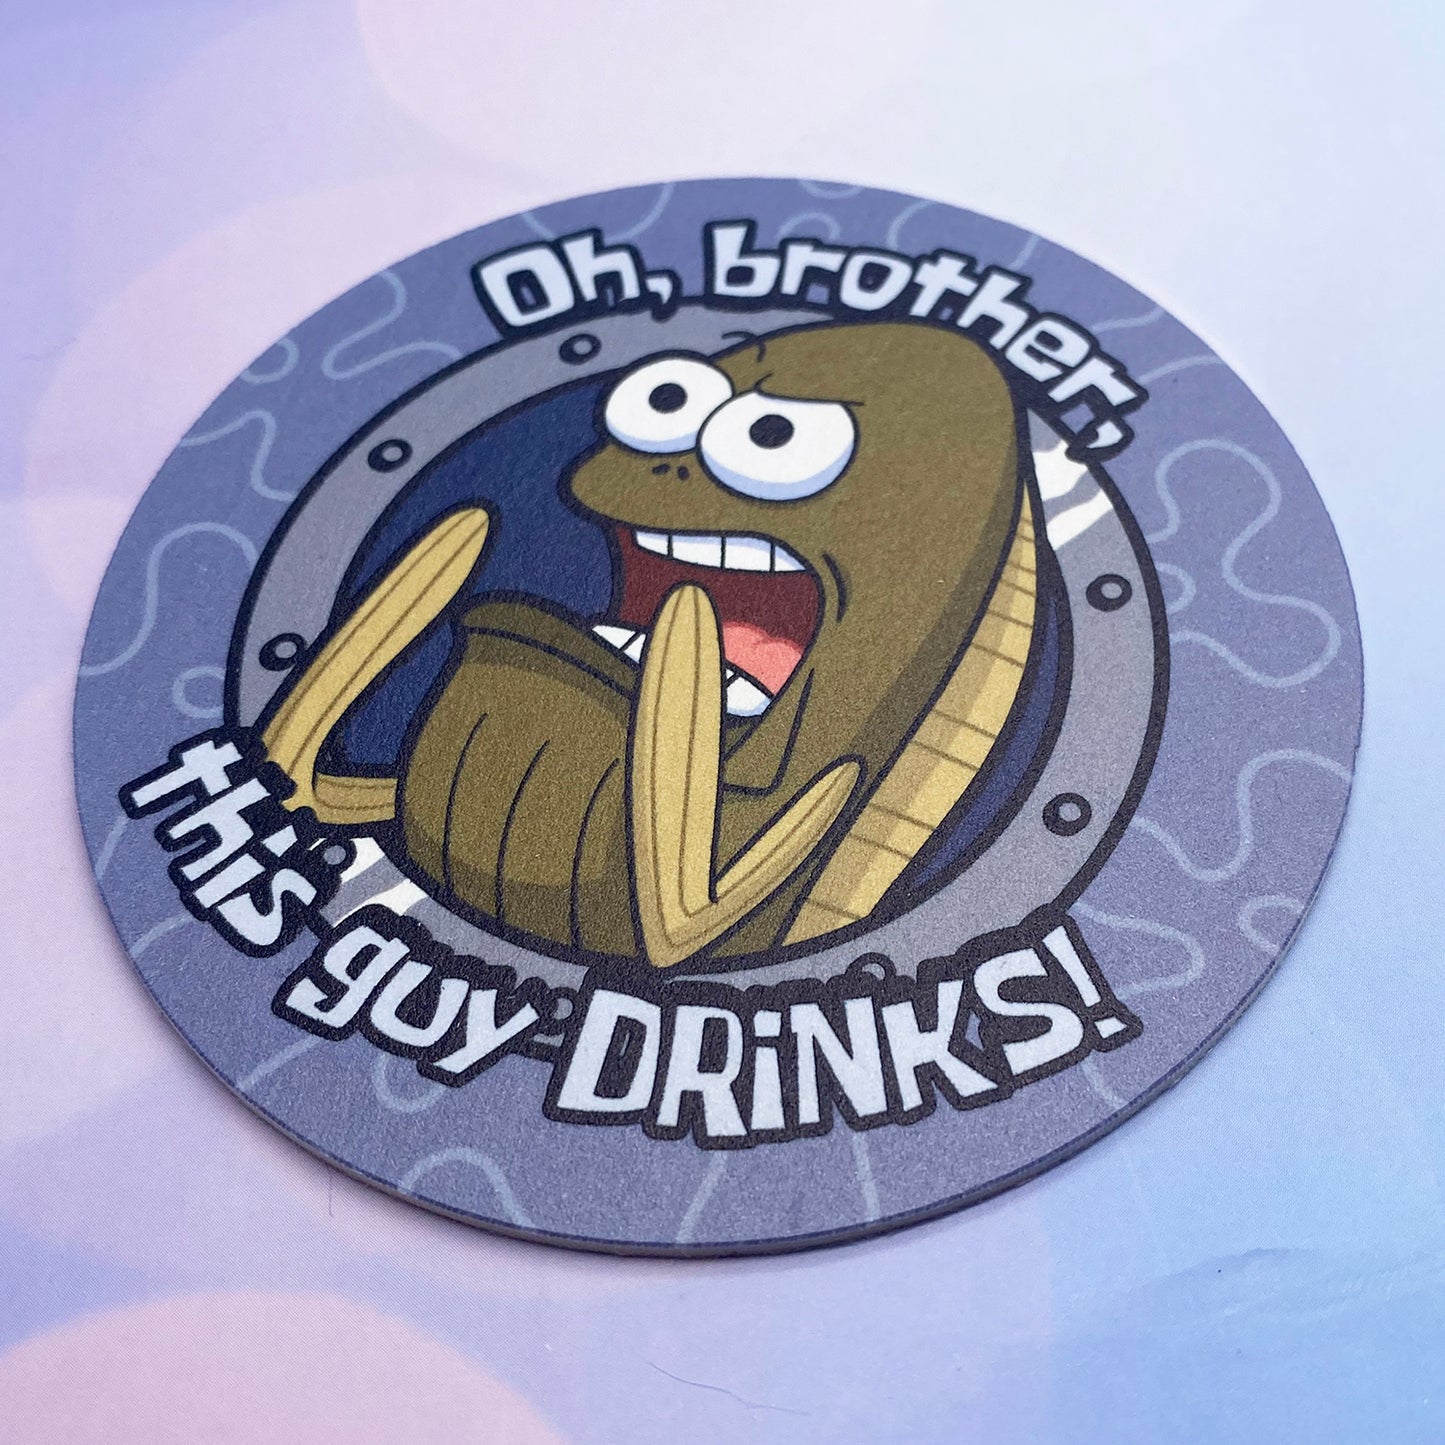 Oh Brother, This Guy Drinks! basic coaster SET OF 4